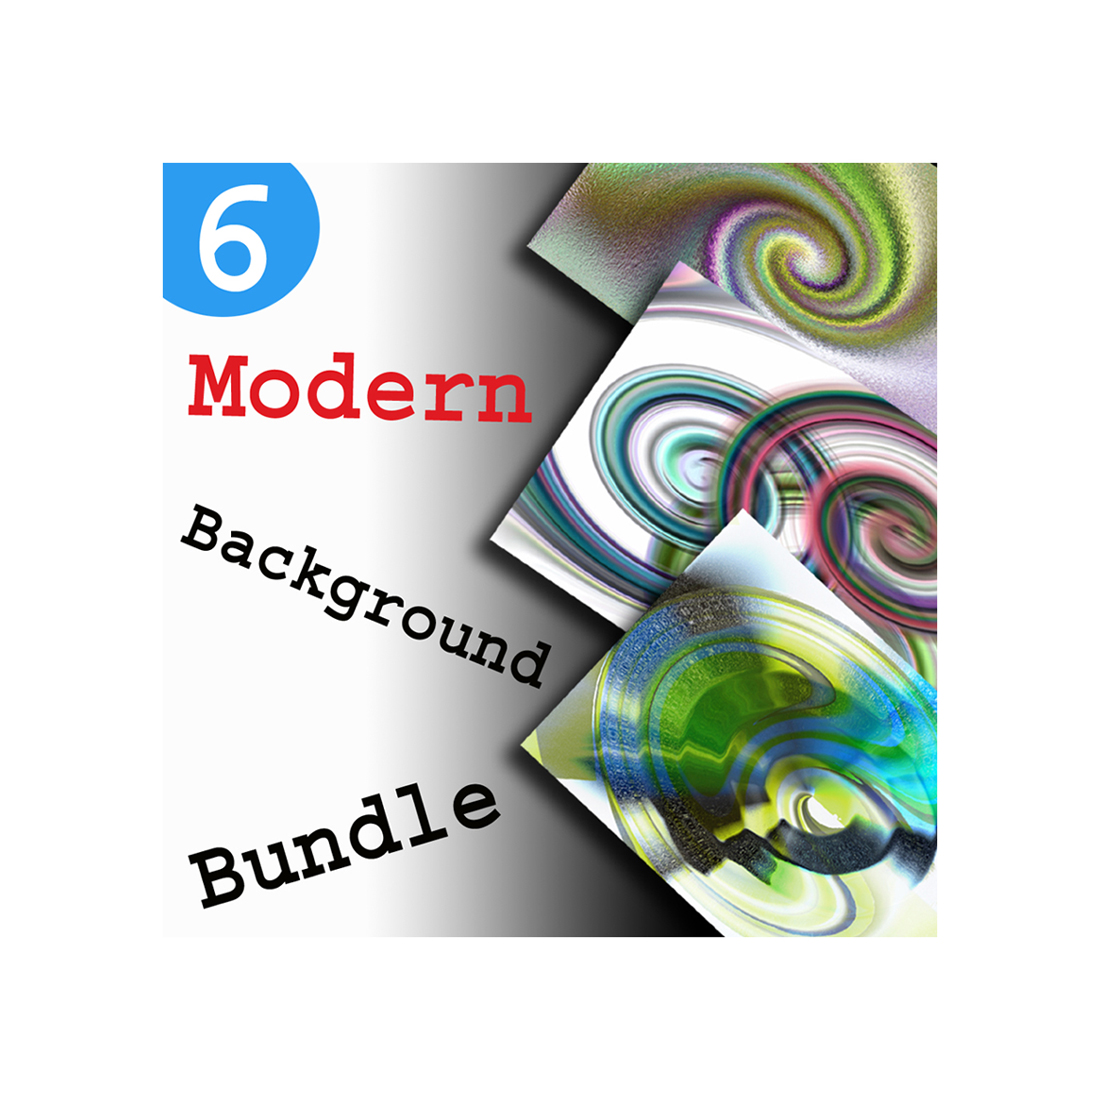 Modern Swirl Backgrounds cover image.